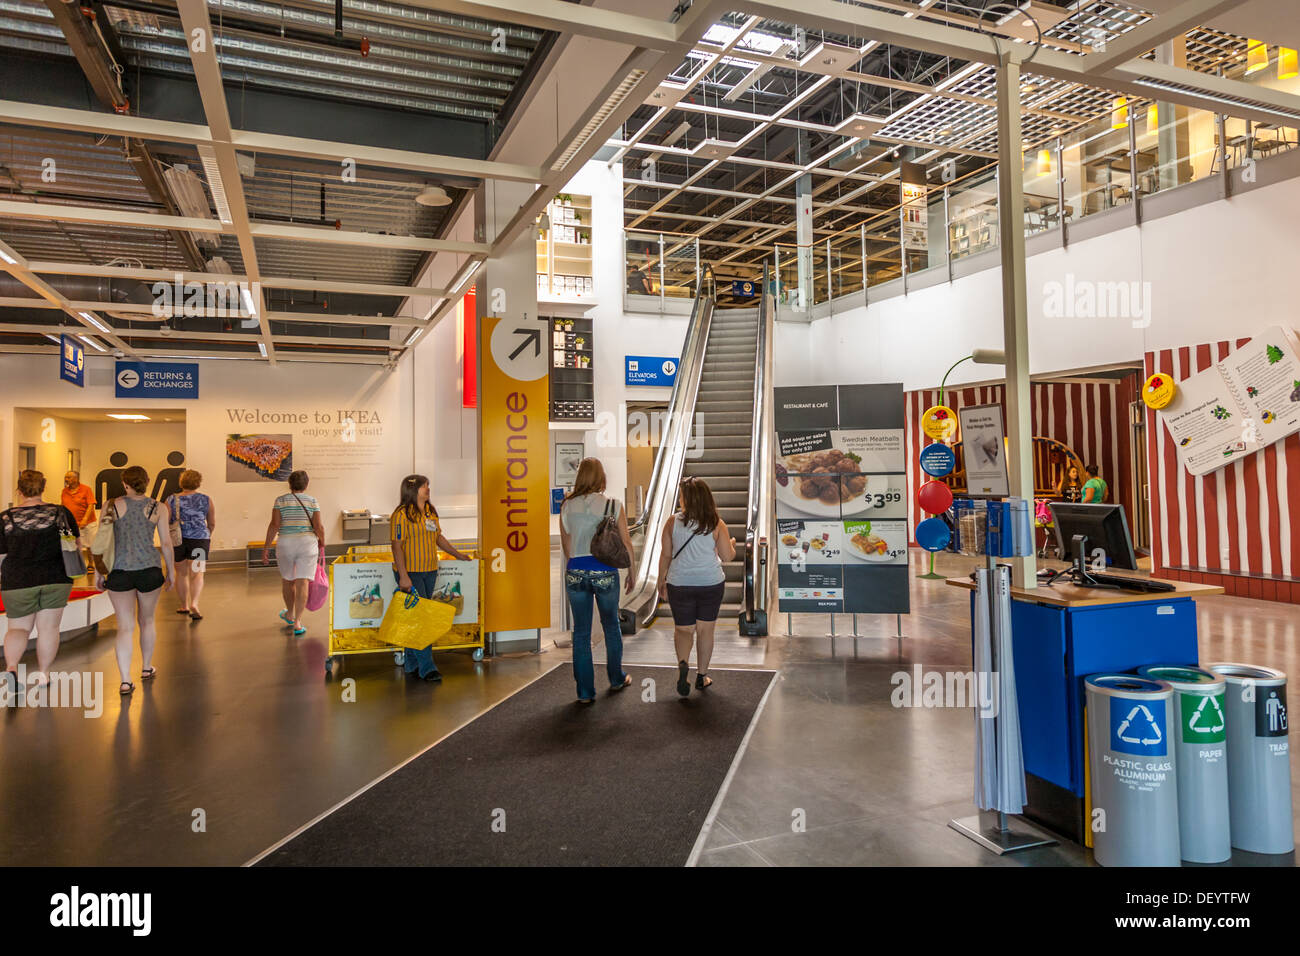 Main entrance to IKEA retail home store in the US Stock Photo